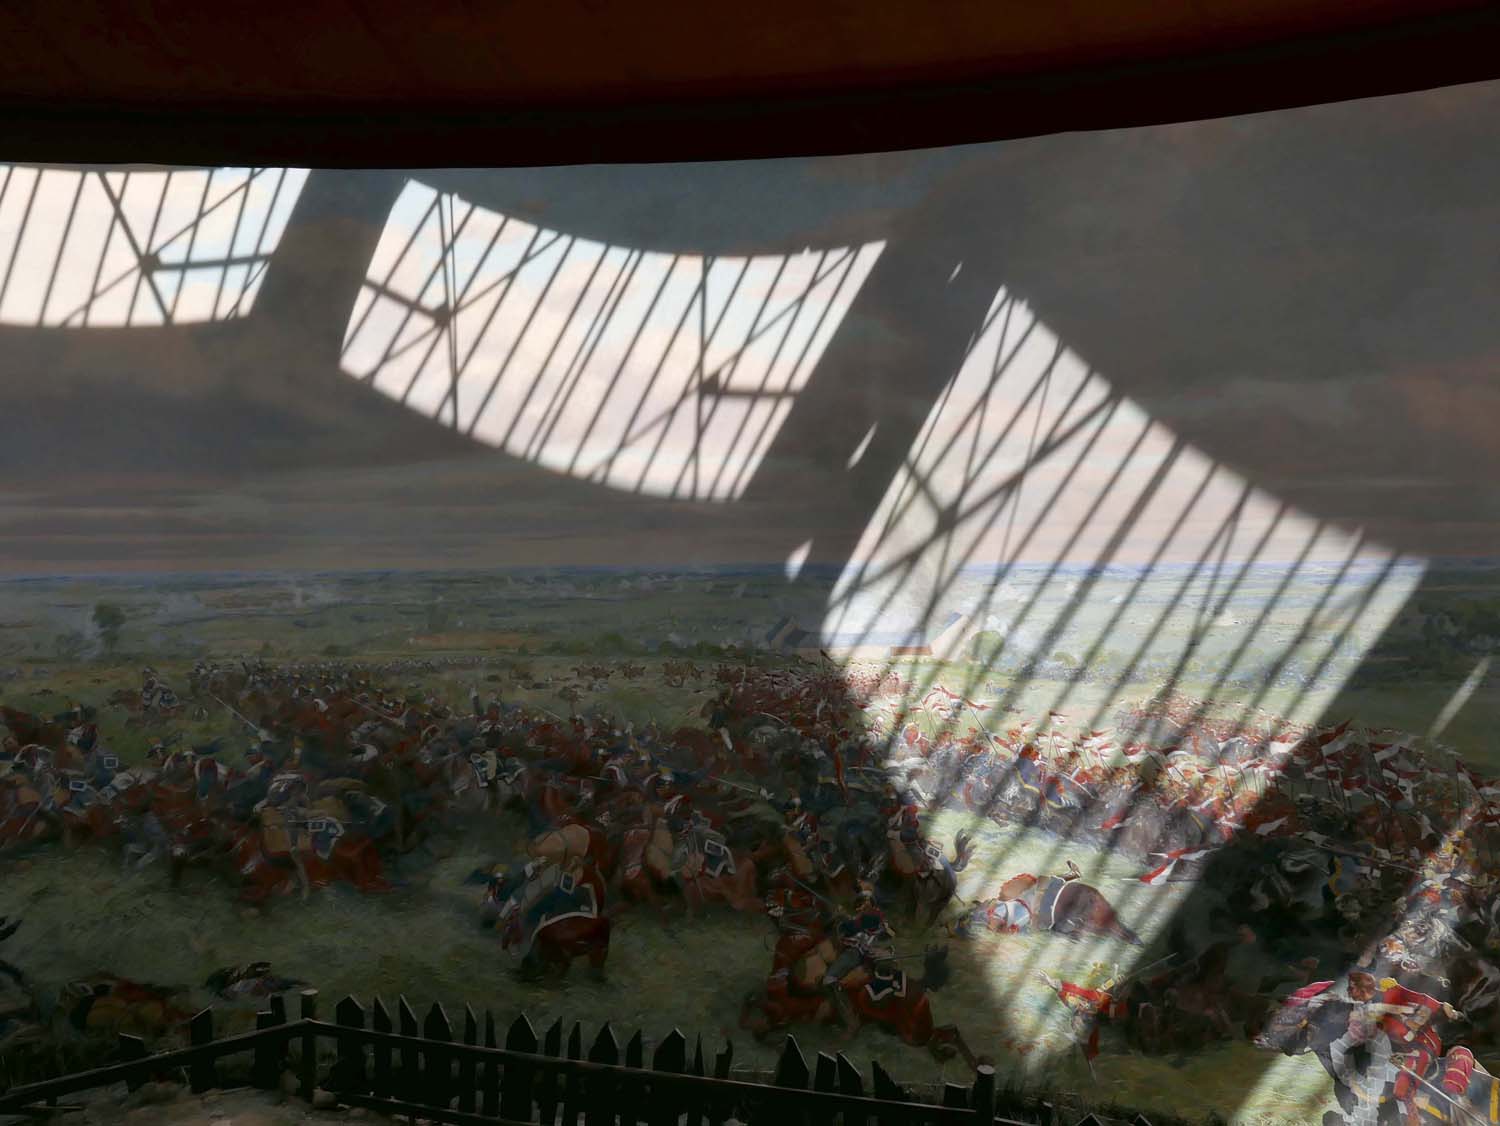 inside the Panorama depicting the battle